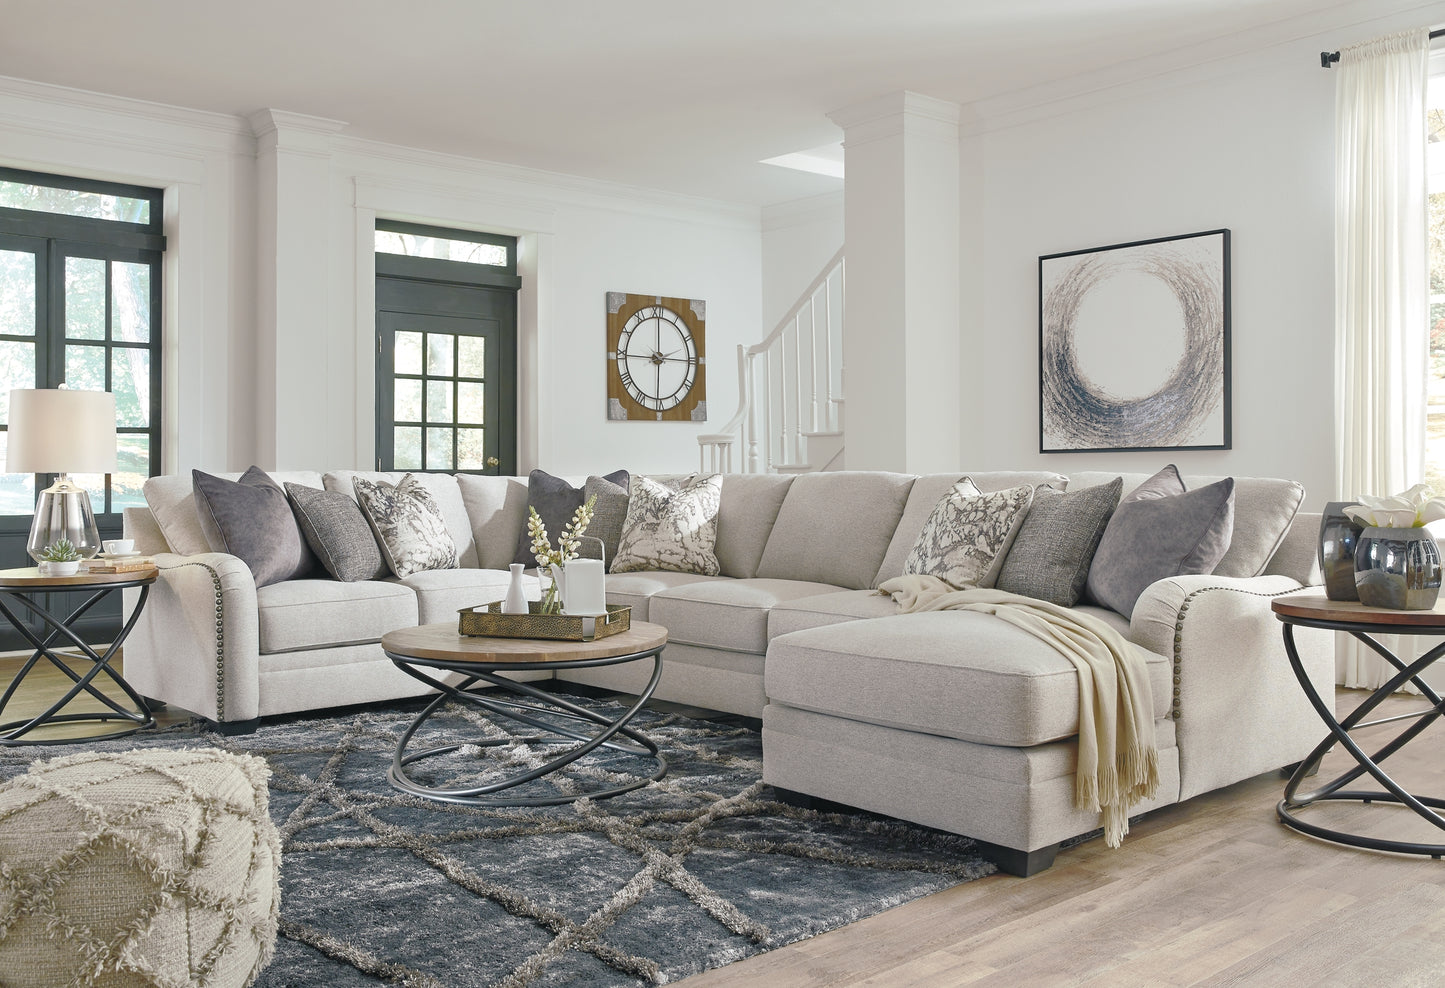 Dellara 5-Piece Sectional with Chaise